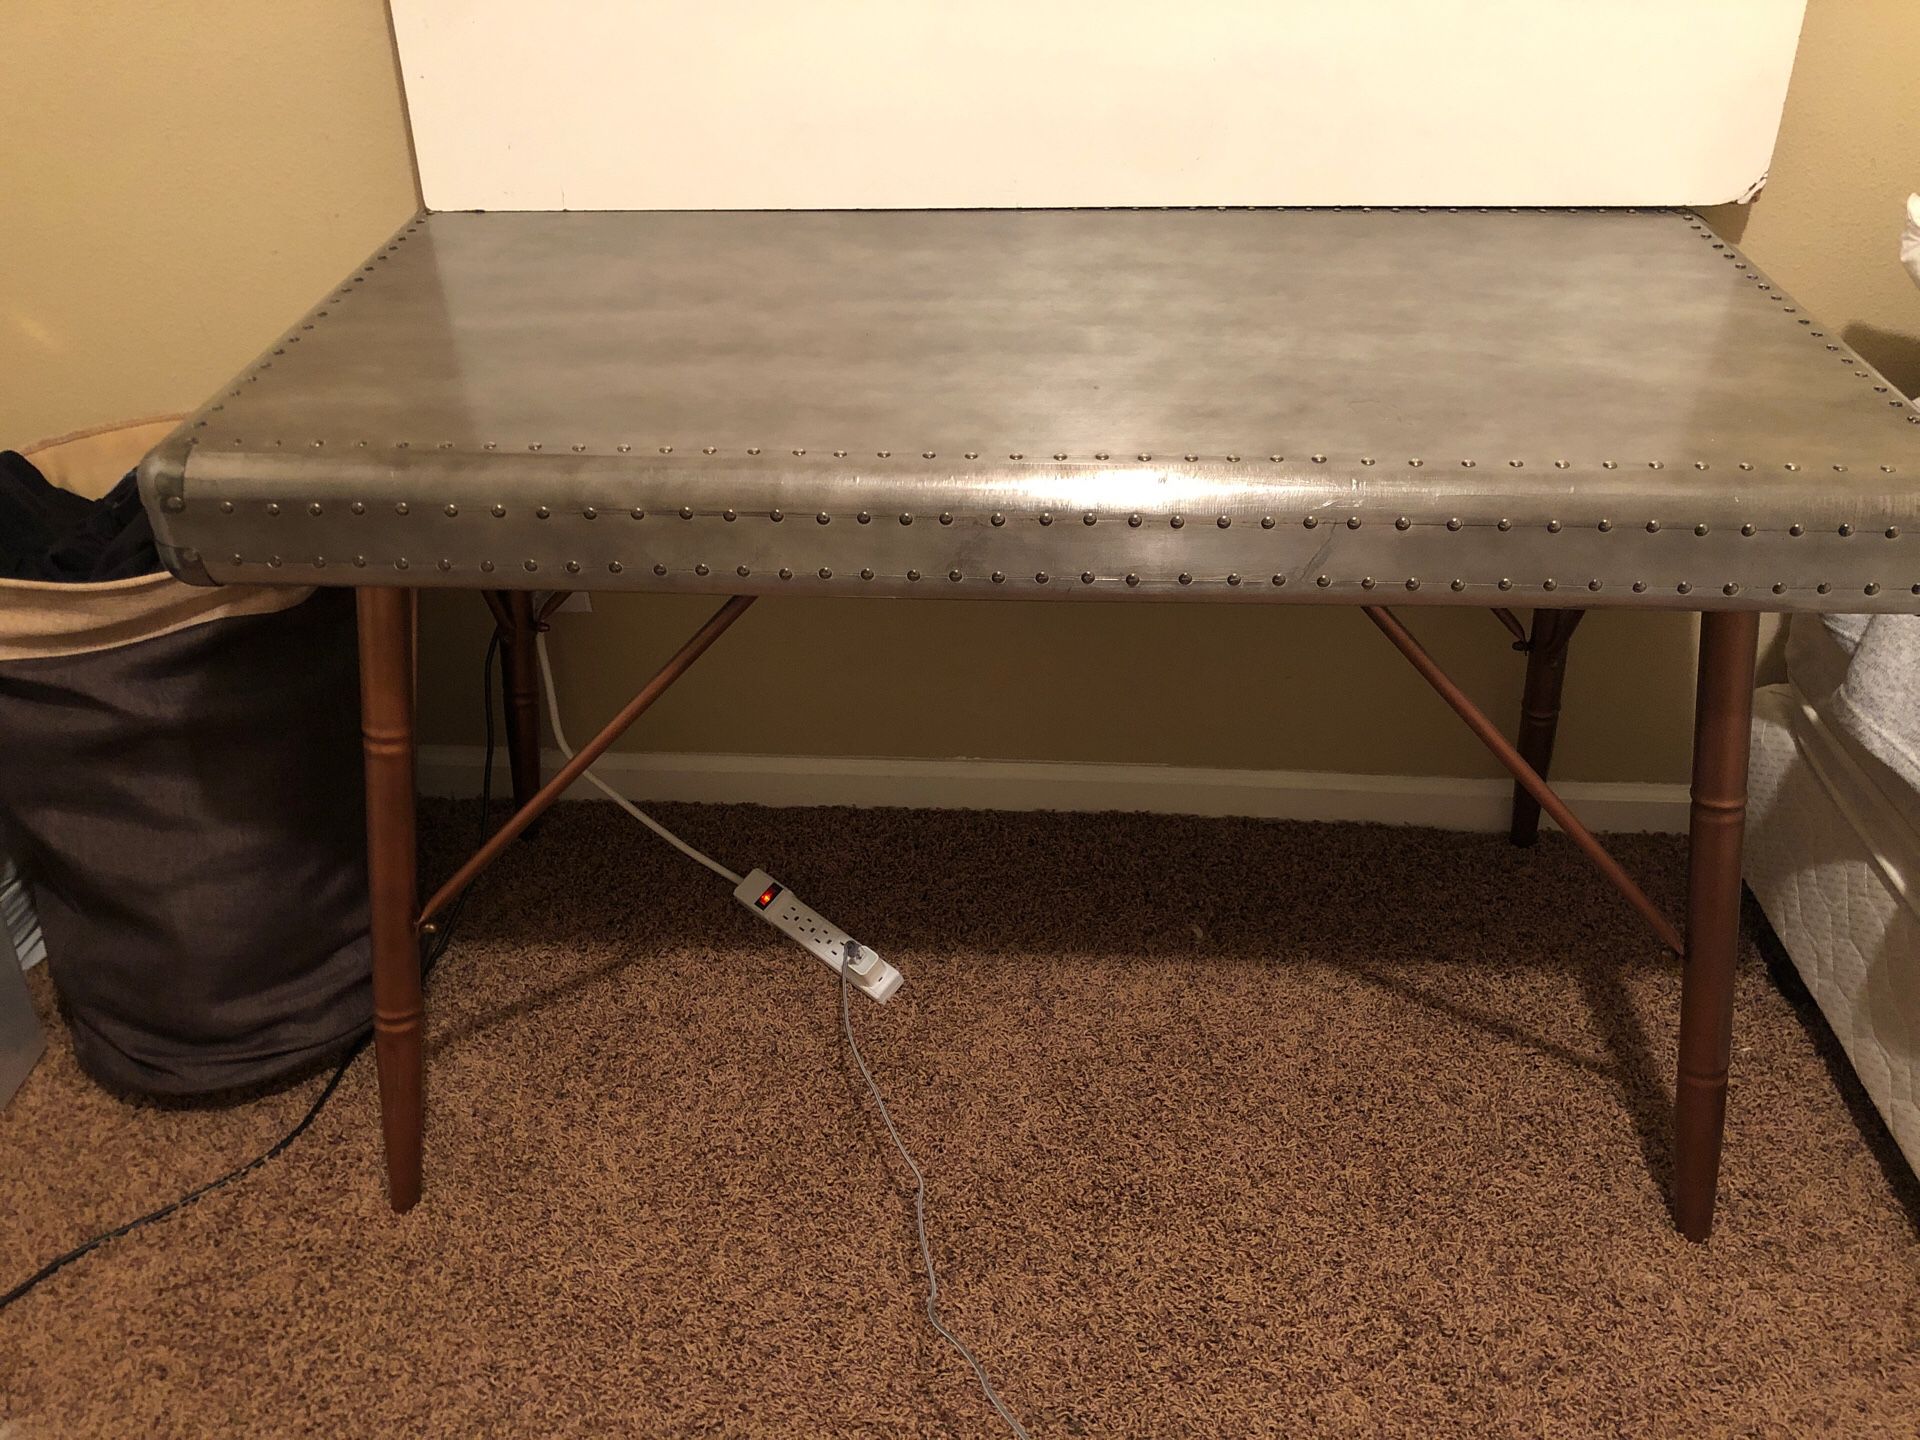 Stainless steal desk! Normal wear and tear. 25x12 3 feet tall. Will need a truck to take this!